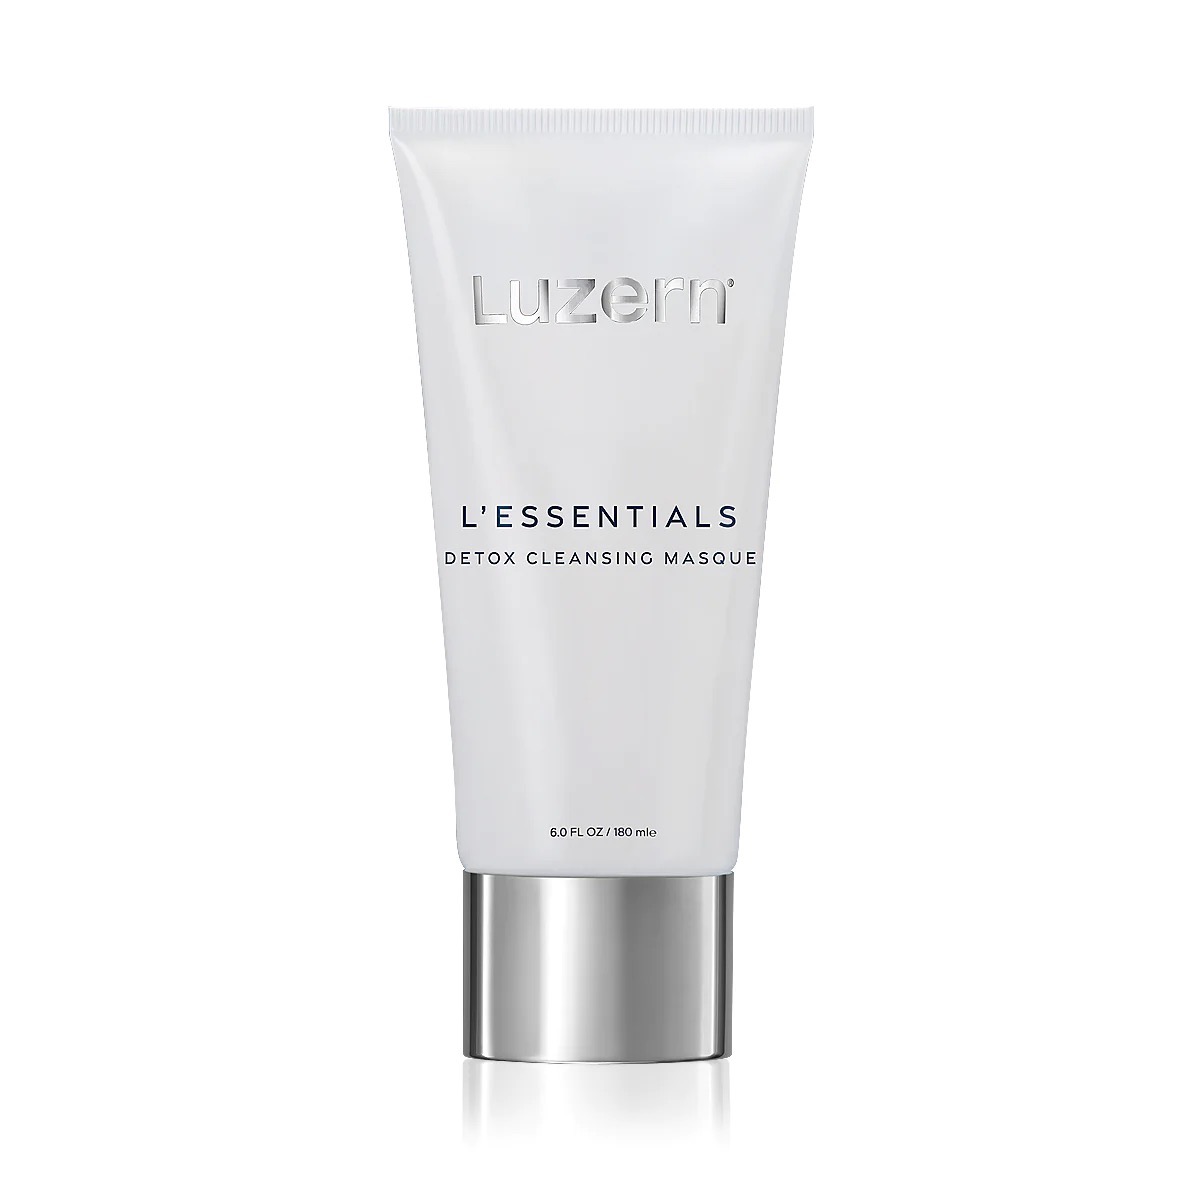 A tube of Luzern Detox Cleansing Masque.